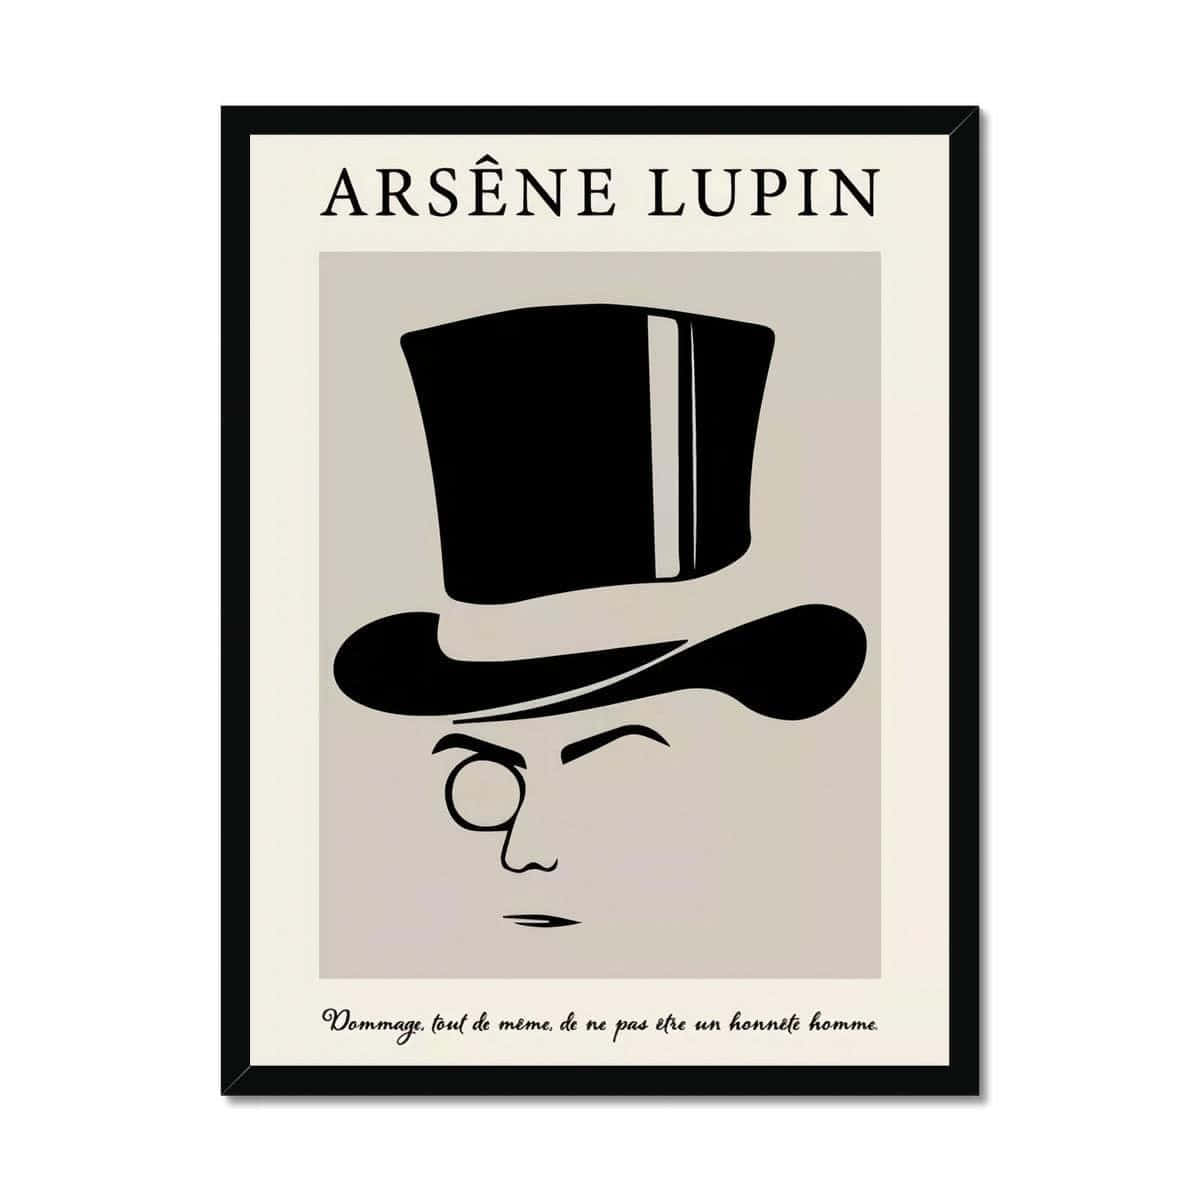 Download Arsène Lupin, the master of disguise and charming gentleman ...